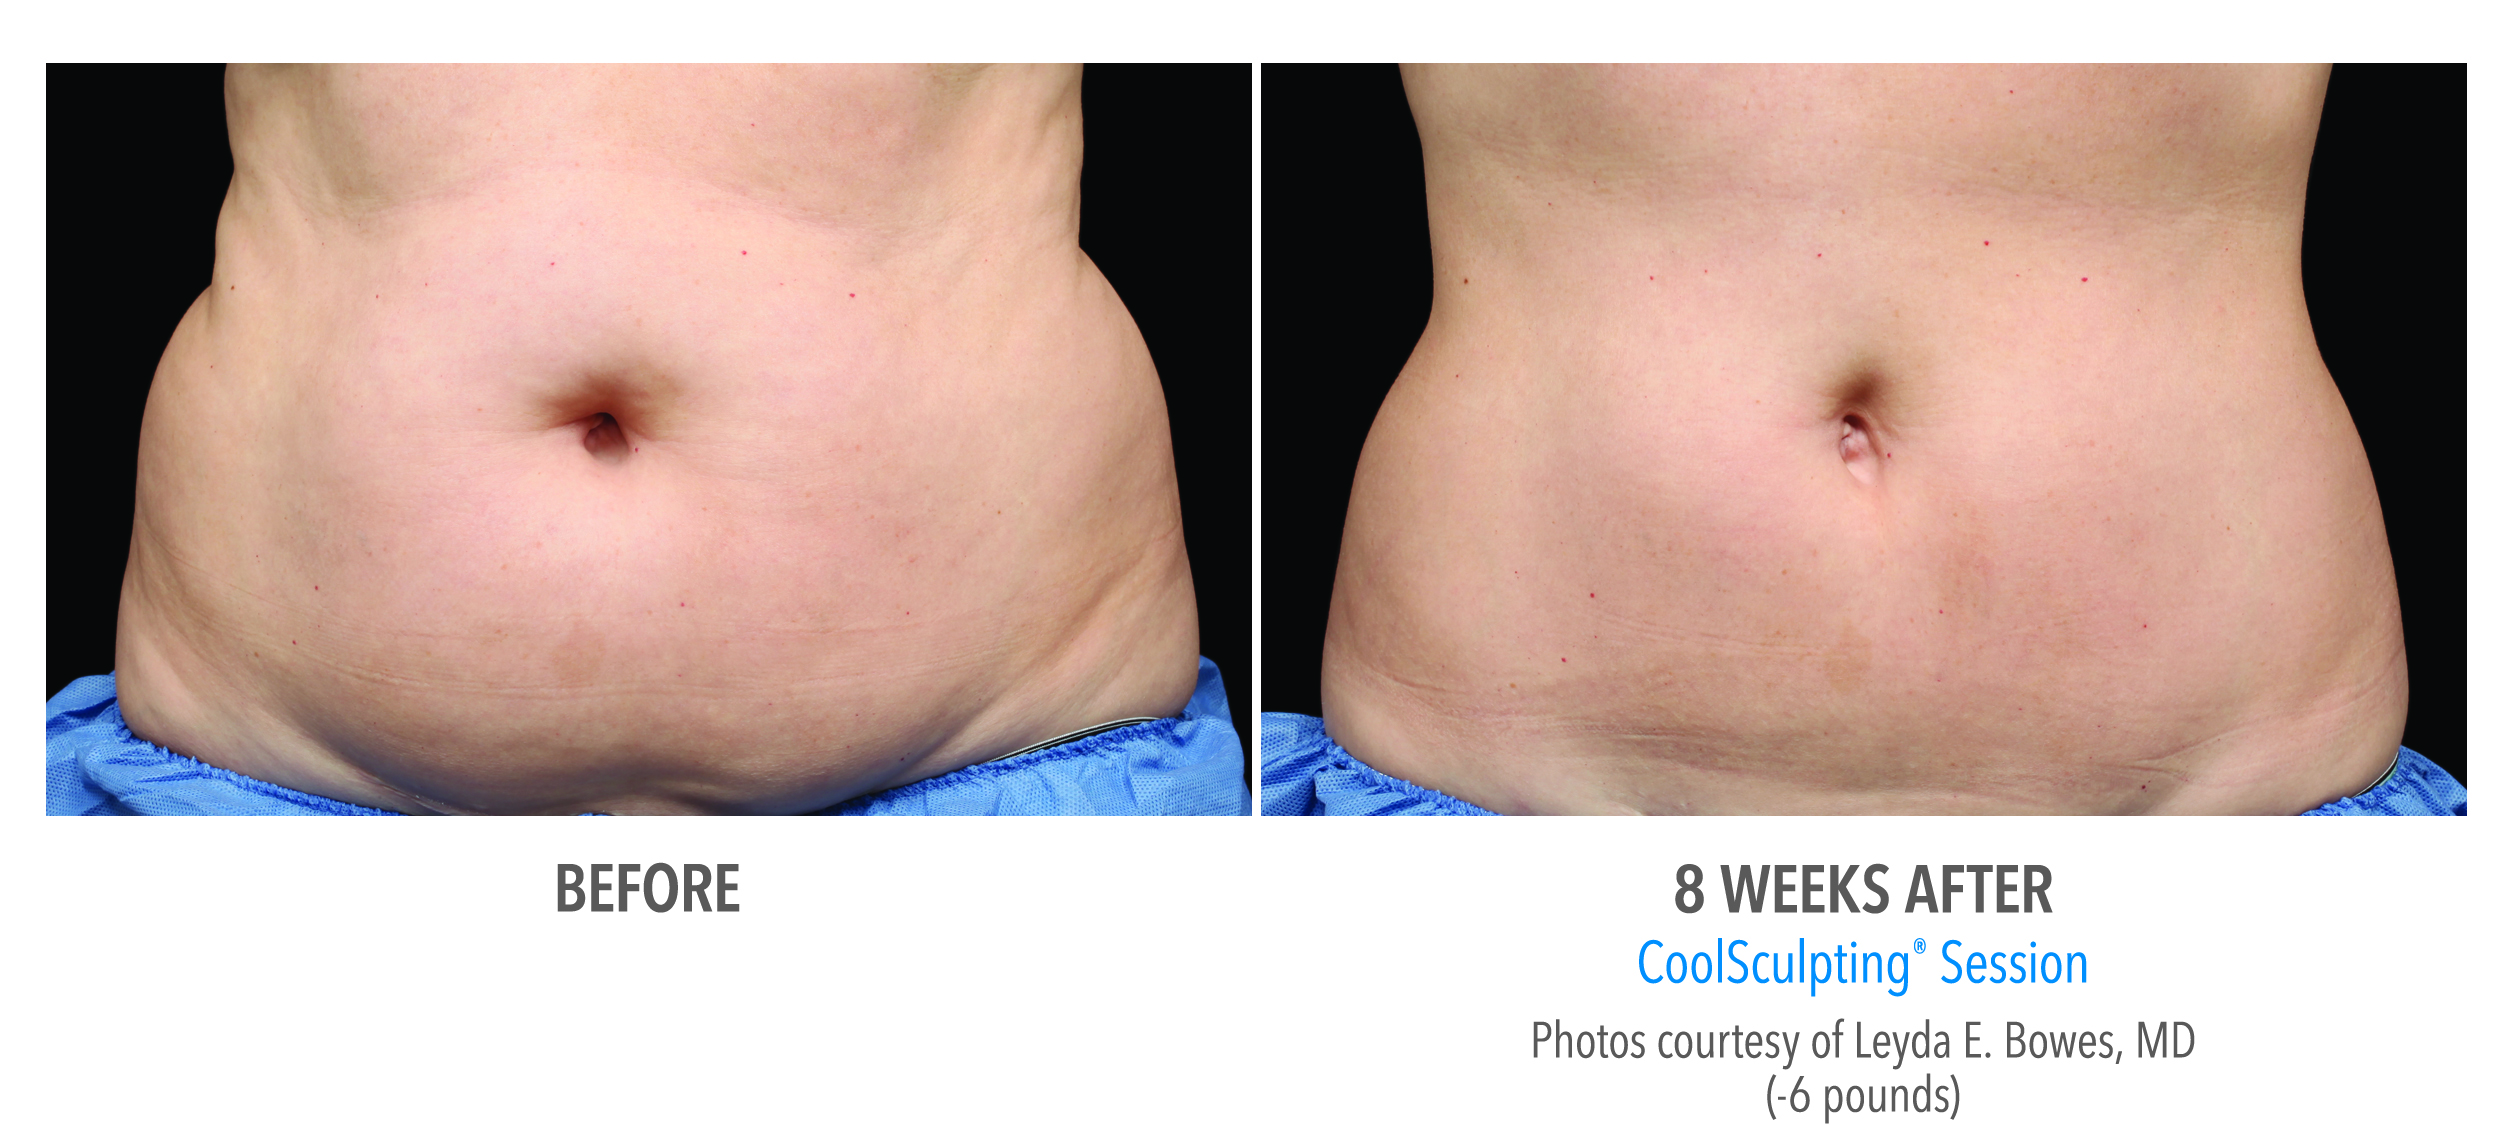 CoolSculpting® Fat Reduction In Gainesville, FL